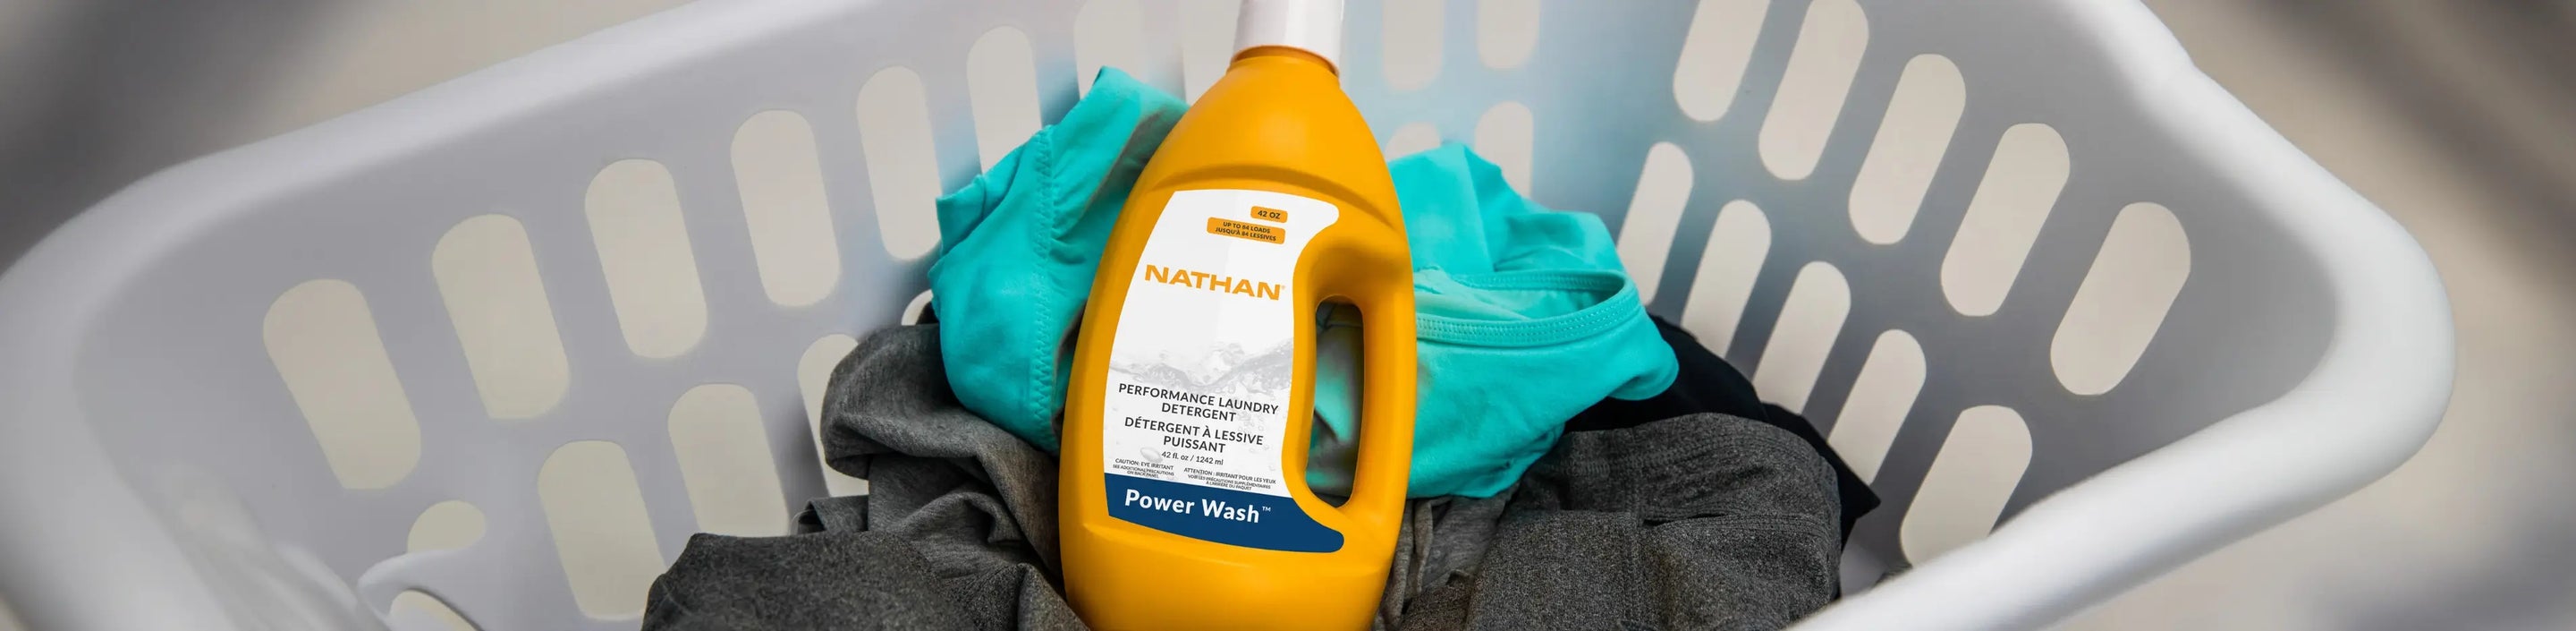 image of laundry basket with couple items of clothing and Nathan Sports bottle of laundry detergent